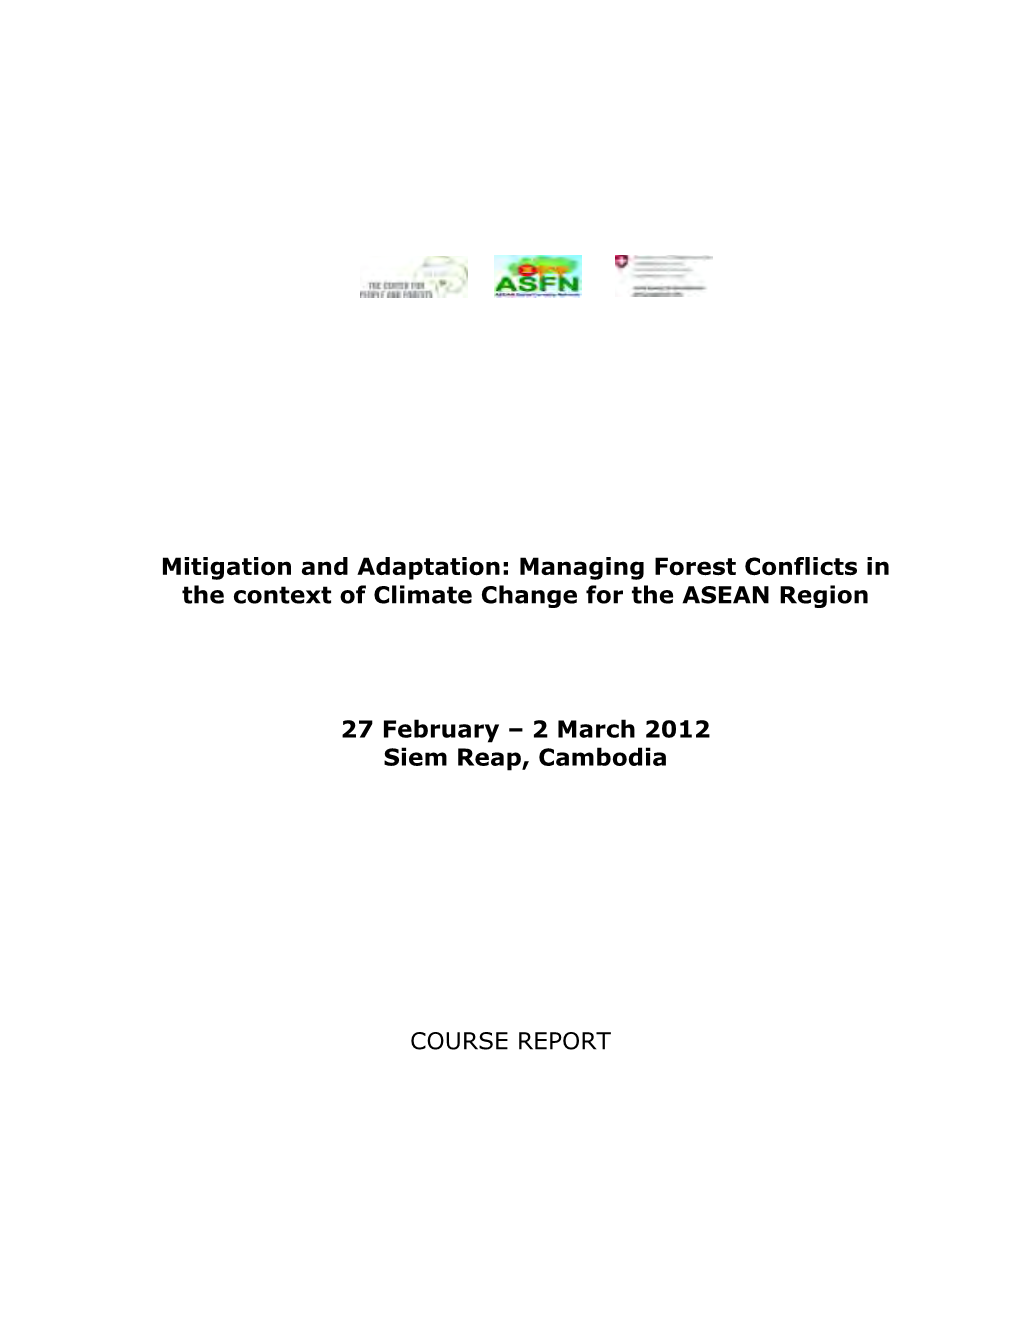 Managing Forest Conflicts in the Context of Climate Change for the ASEAN Region